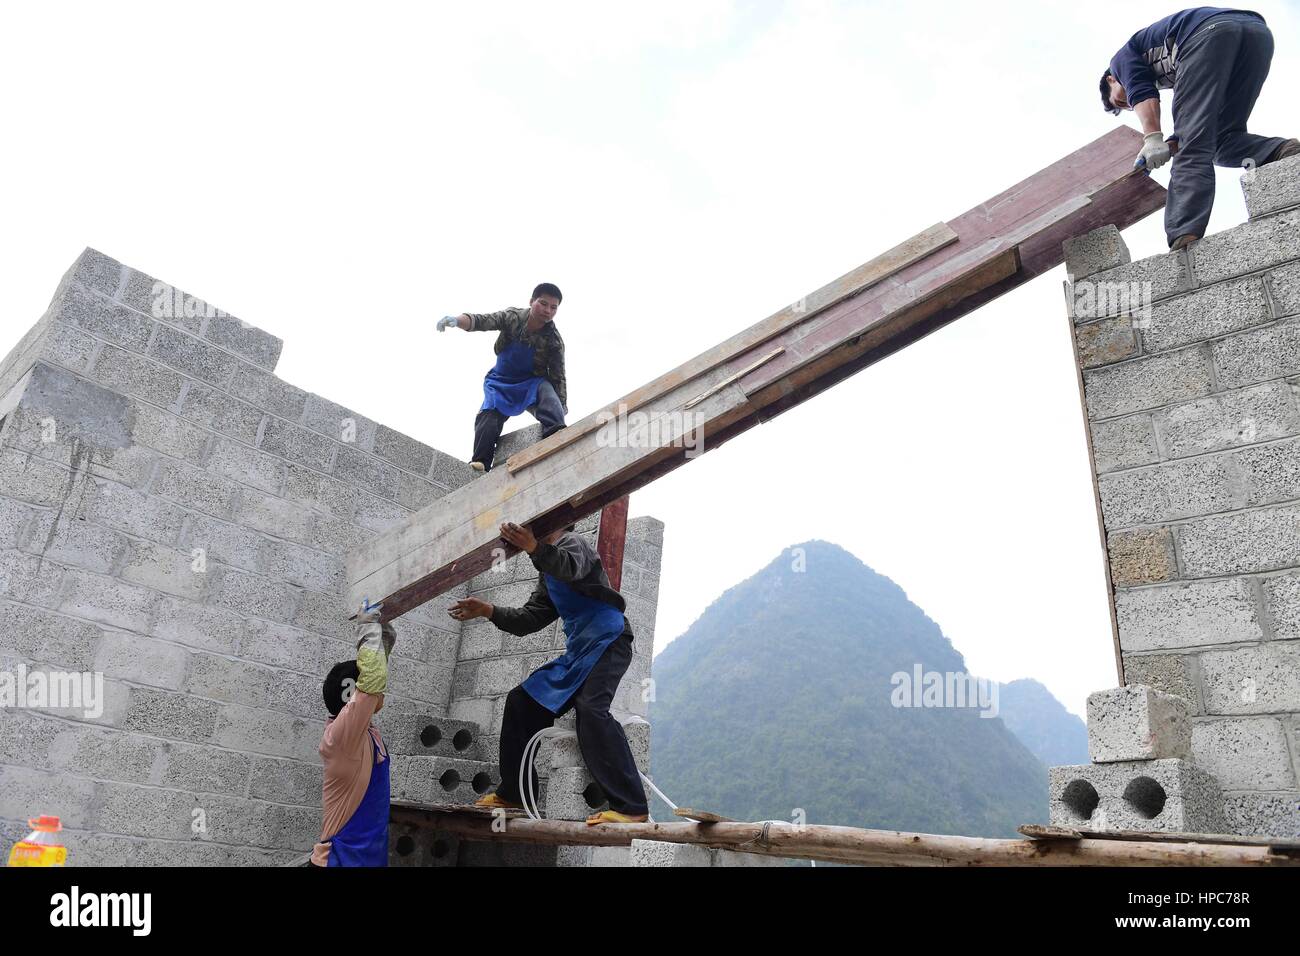 (170221) -- DAHUA, Feb. 21, 2017 (Xinhua) -- Villagers build a house in Nongteng Village of Qibainong Township in Dahua Yao Autonomous County, south China's Guangxi Zhuang Autonomous Region, Jan. 7, 2017. "Cursed by devils" -- that is what the locals say about Qibainong. Named after the rugged karst landforms that surround it, the township has been identified as one of the most inhospitable places on earth by UN officials. However, change is expected soon. Local governments are building roads for every village with more than 20 households. Relocation has been proposed for those who live in ext Stock Photo